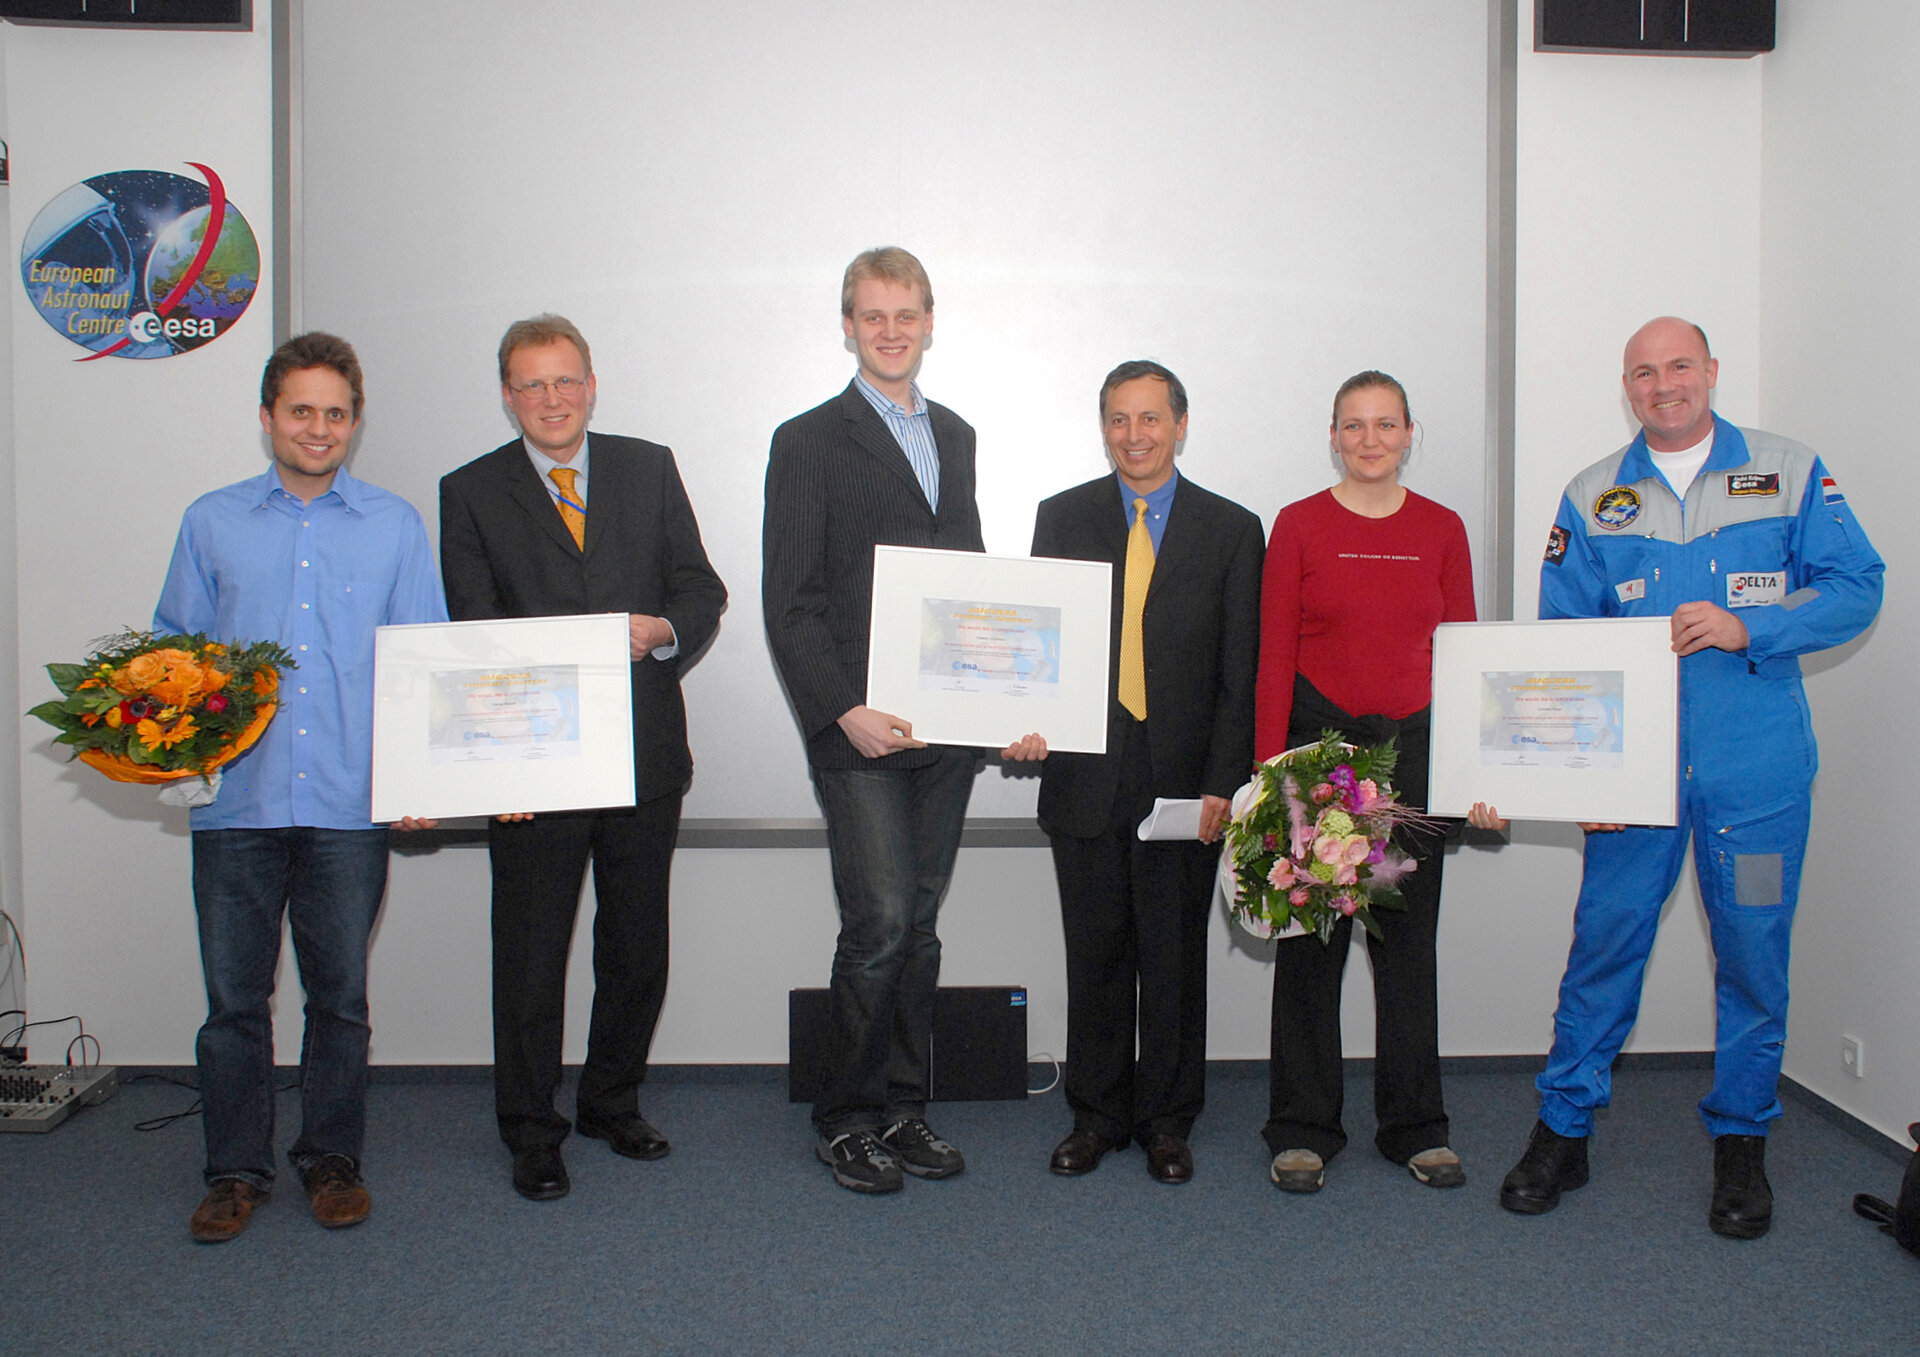 The SUCCESS winners were announced during a ceremony at the European Astronaut Centre, Cologne